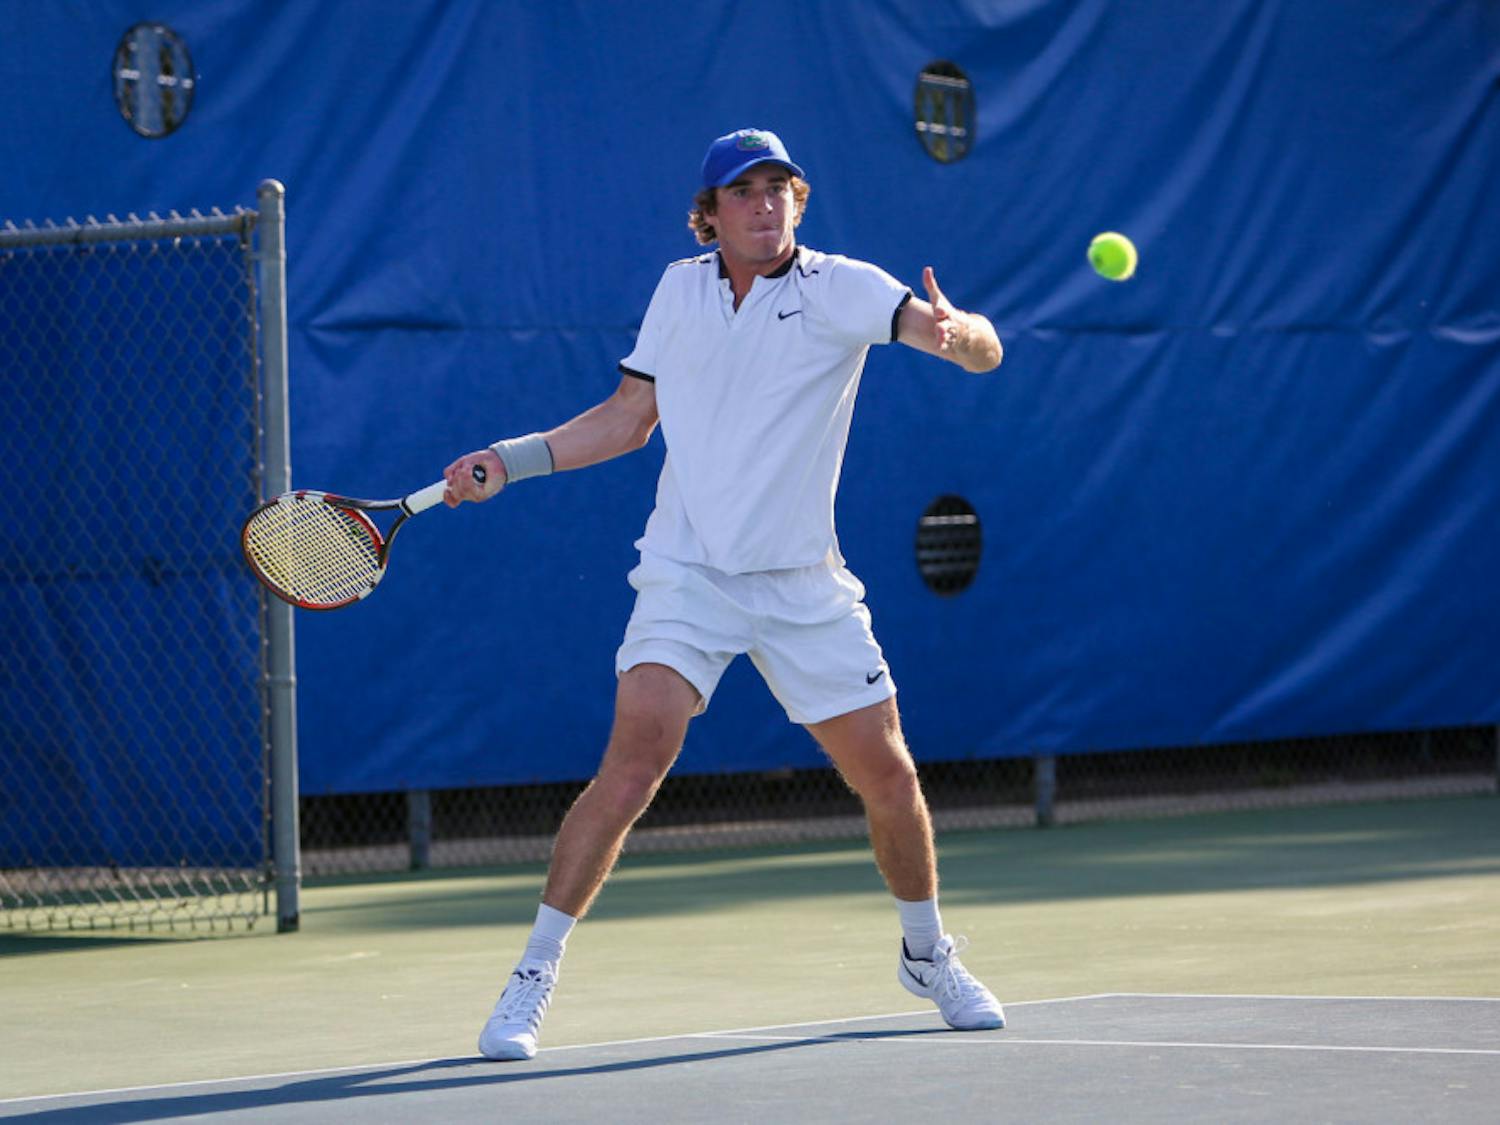 UF men’s tennis sophomore Oliver Crawford is the No. 9-ranked collegiate player. He is one of three Gators ranked in the top 50.
&nbsp;